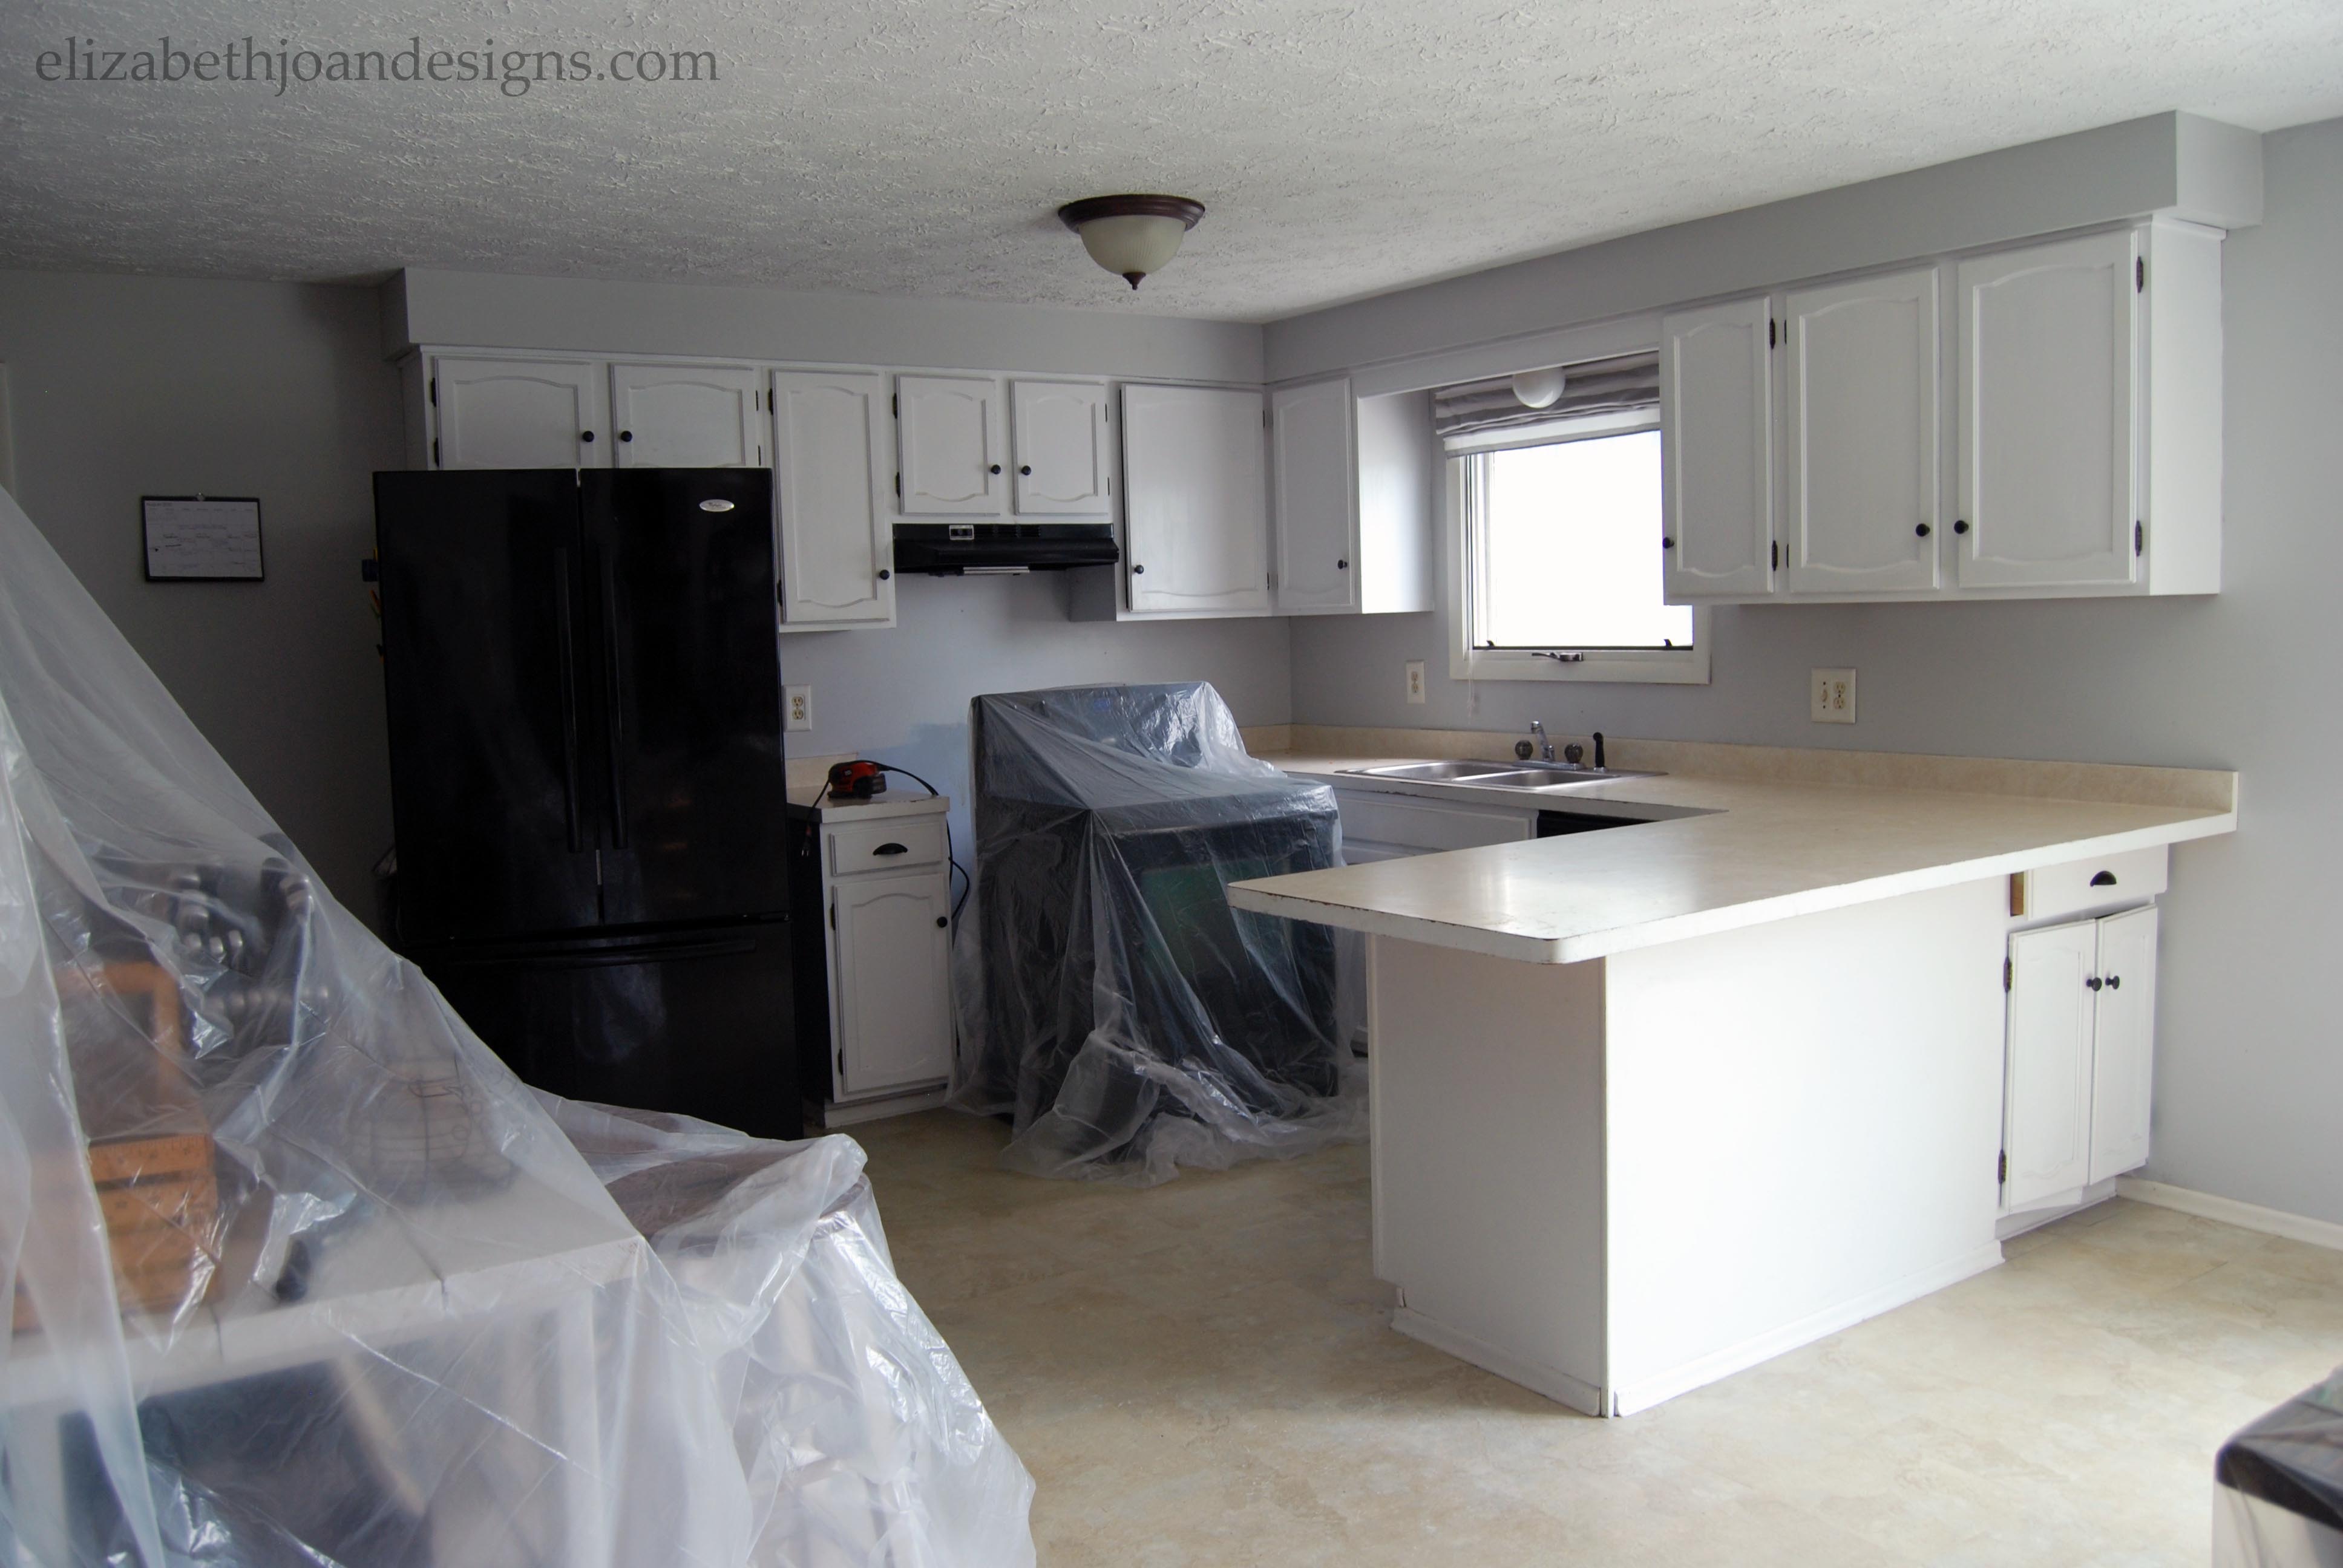 Our Experience With Ardex Concrete Counters Elizabeth Joan Designs